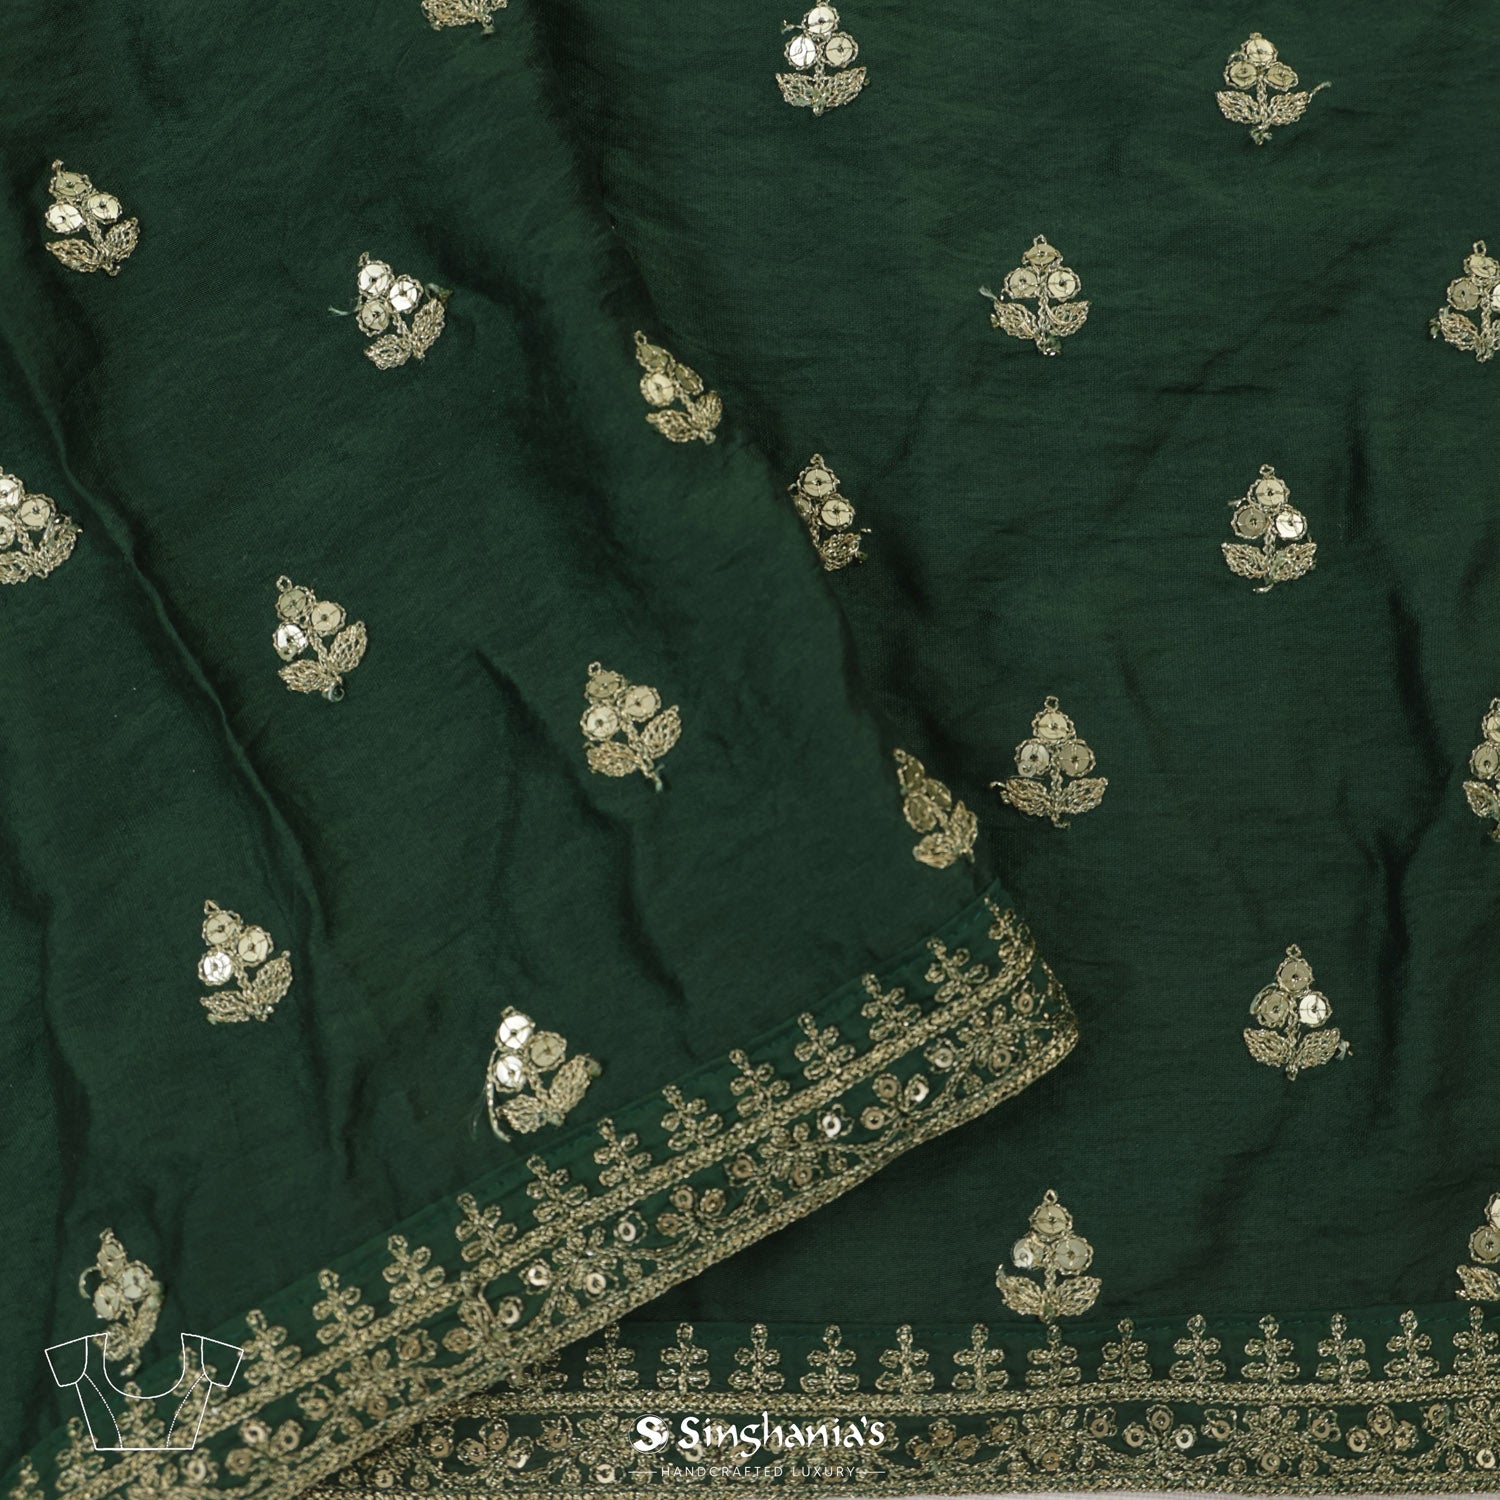 Green Multicolour Printed Tussar Saree With Stripes Pattern